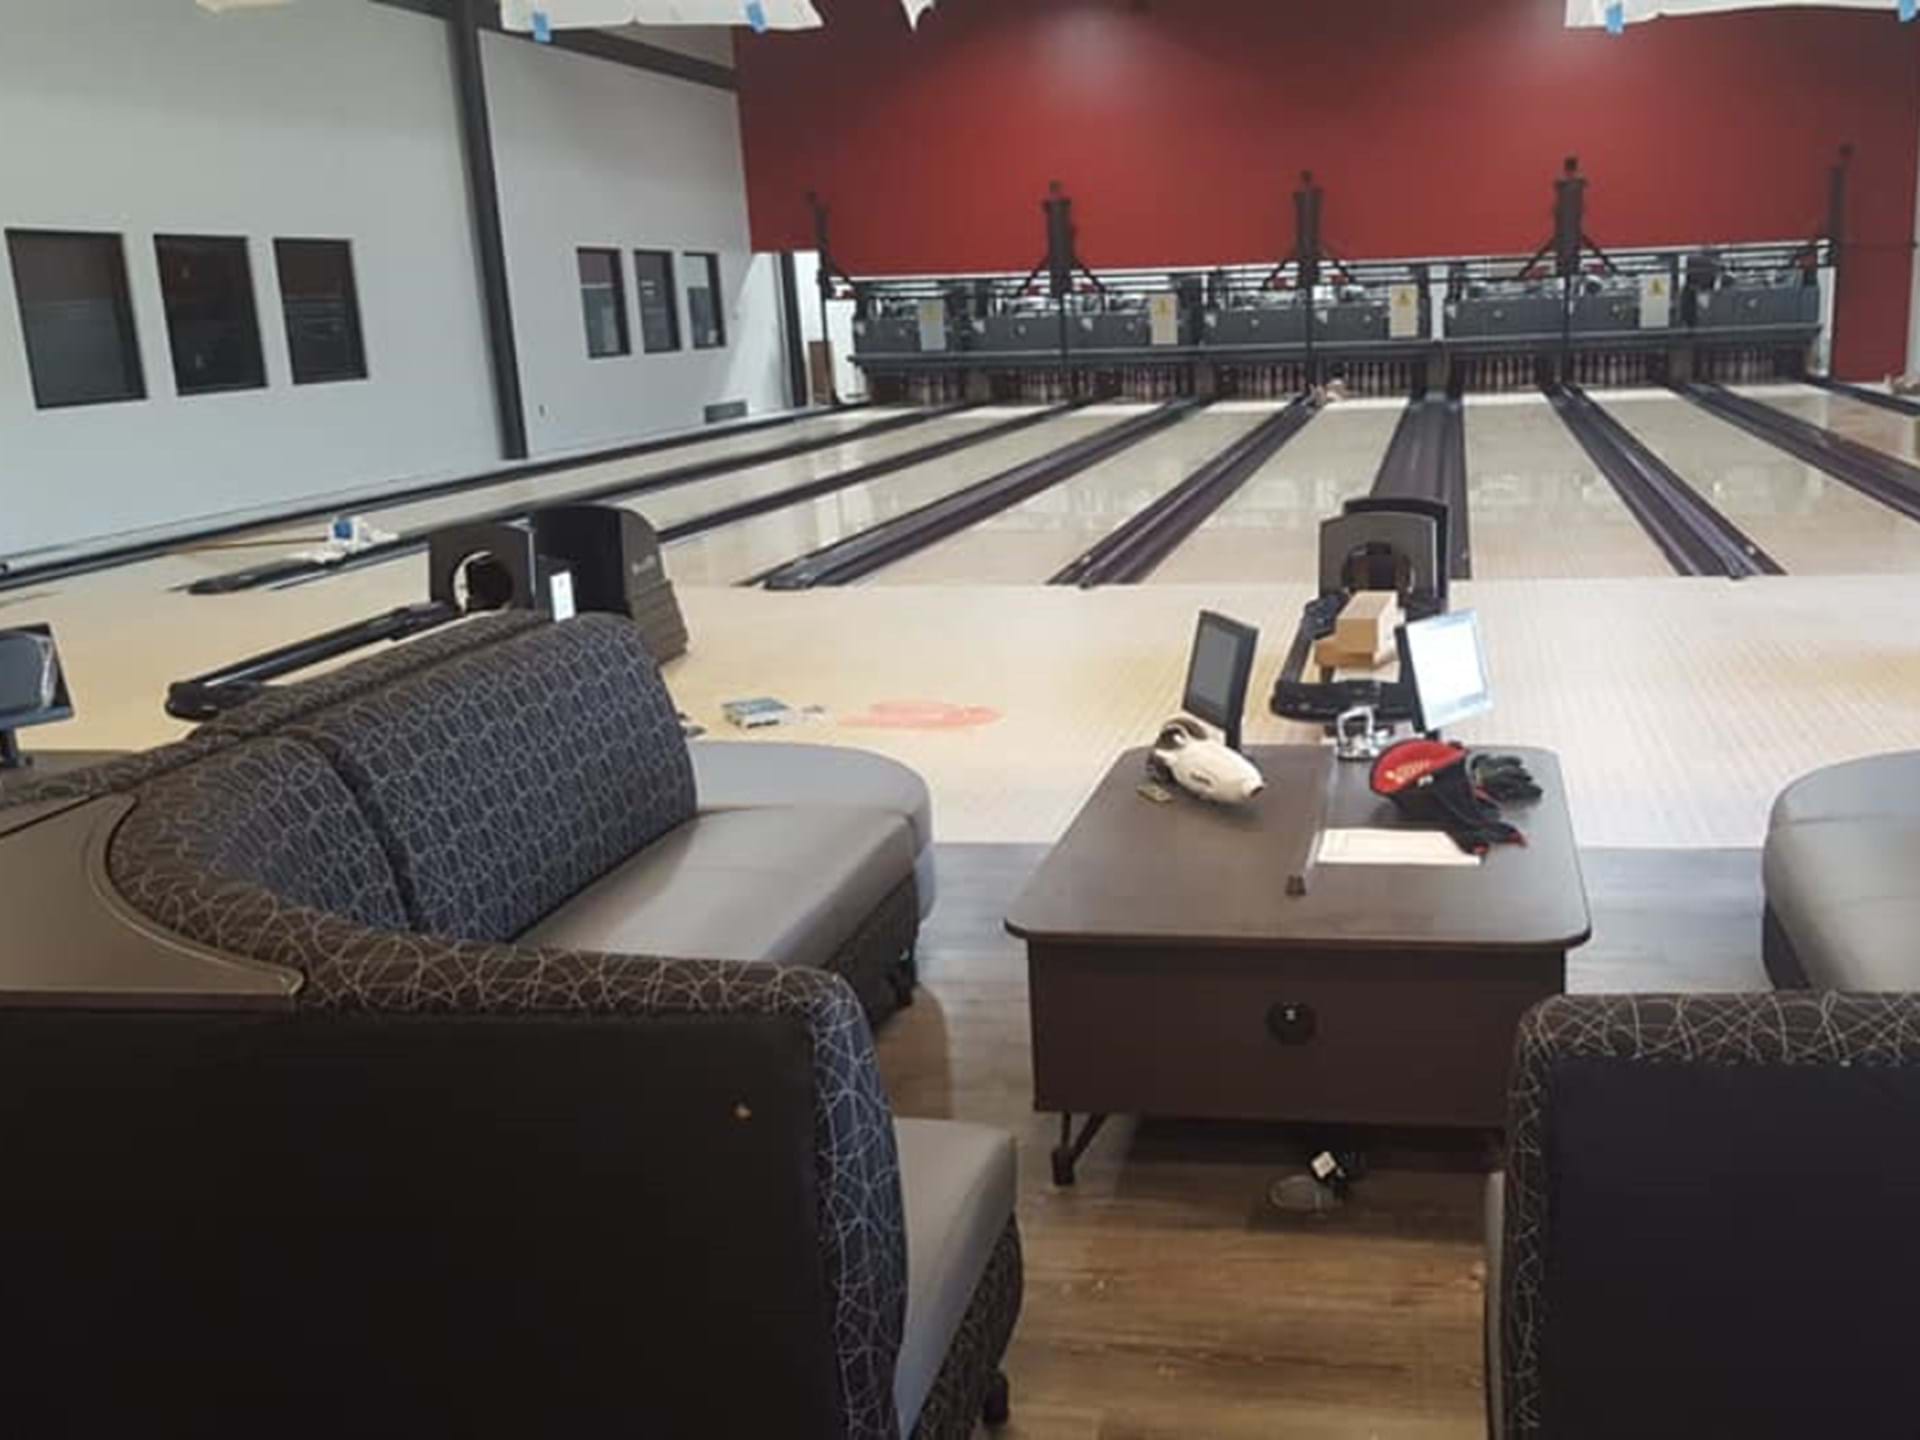 The Bull Pin Bowling Alley